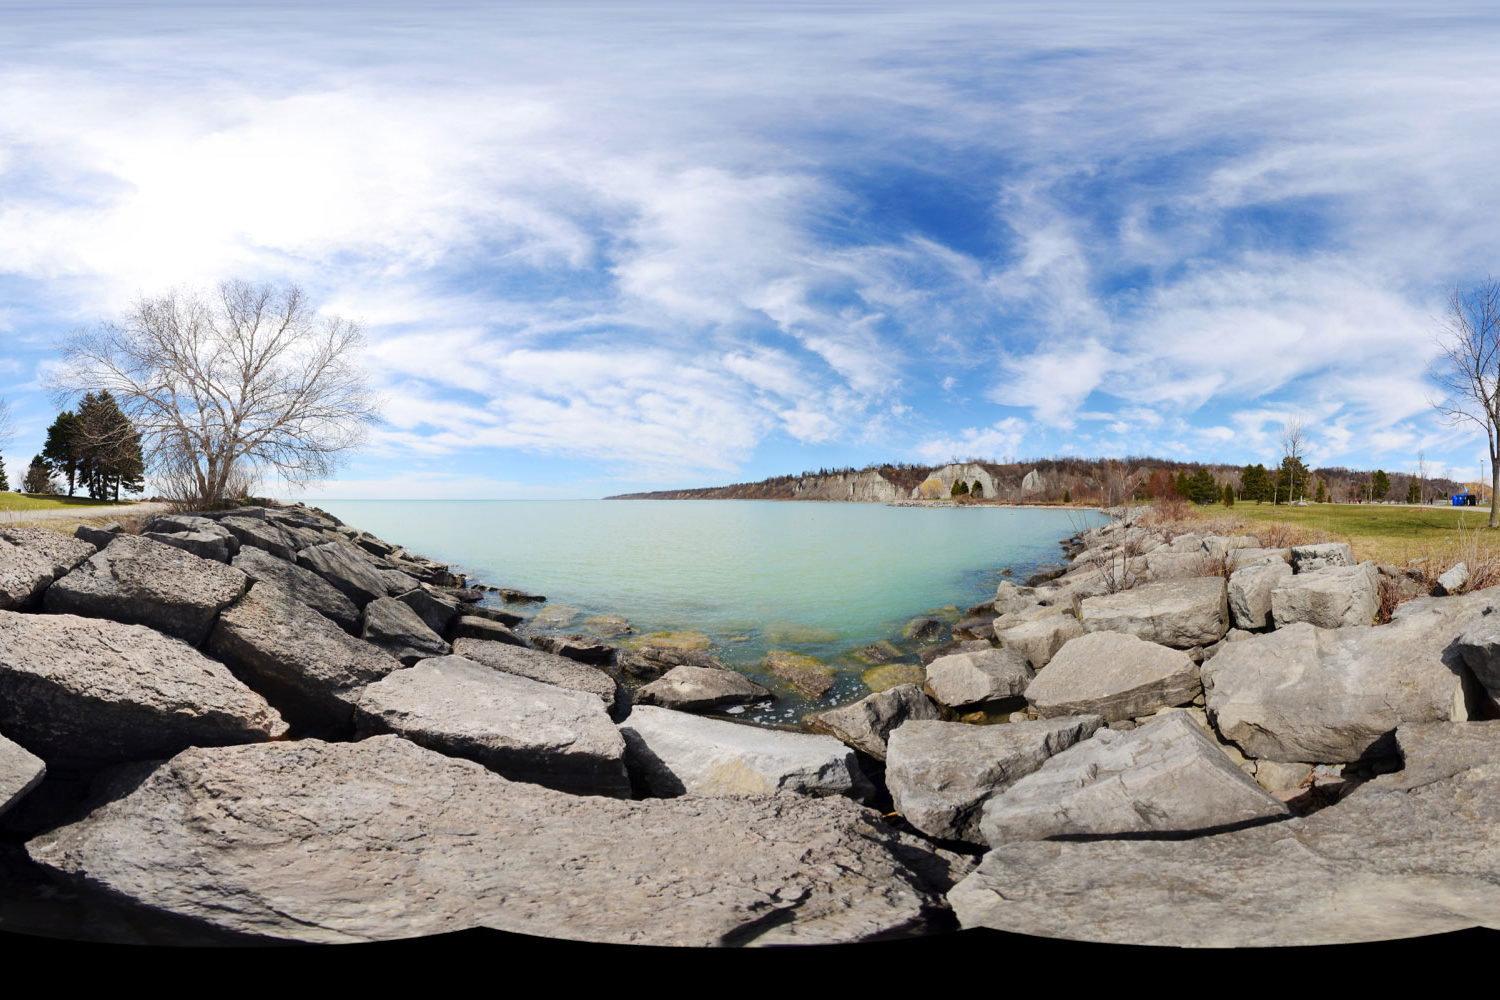 360 Photography 101: How To Get Started